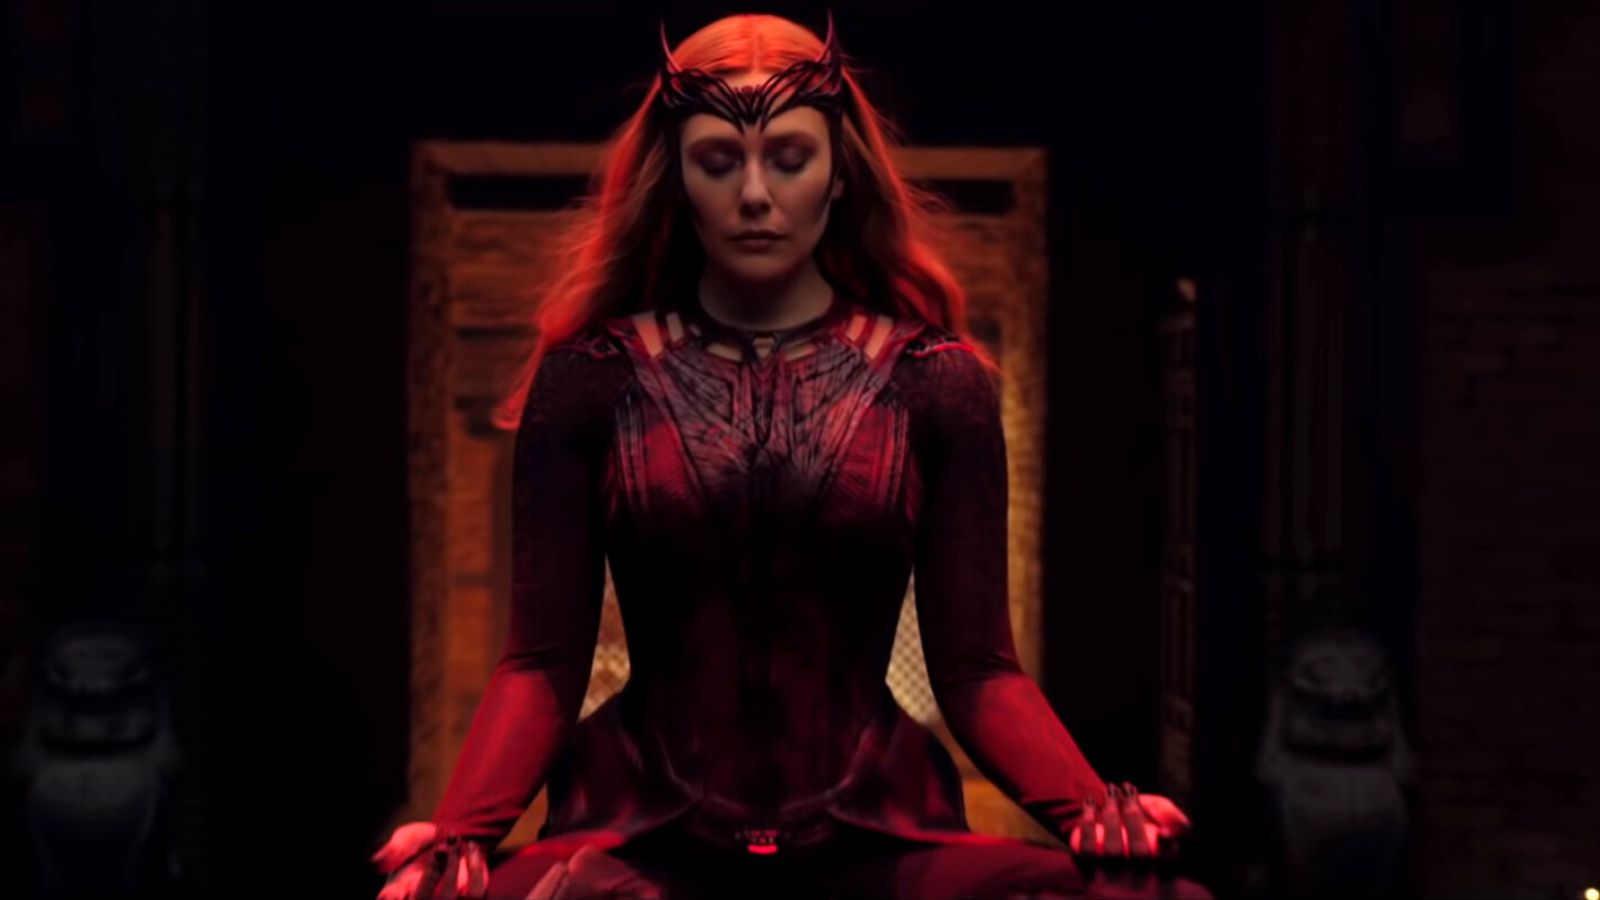 Wanda Maximoff Scarlet Witch Doctor Strange in the multiverse of madness